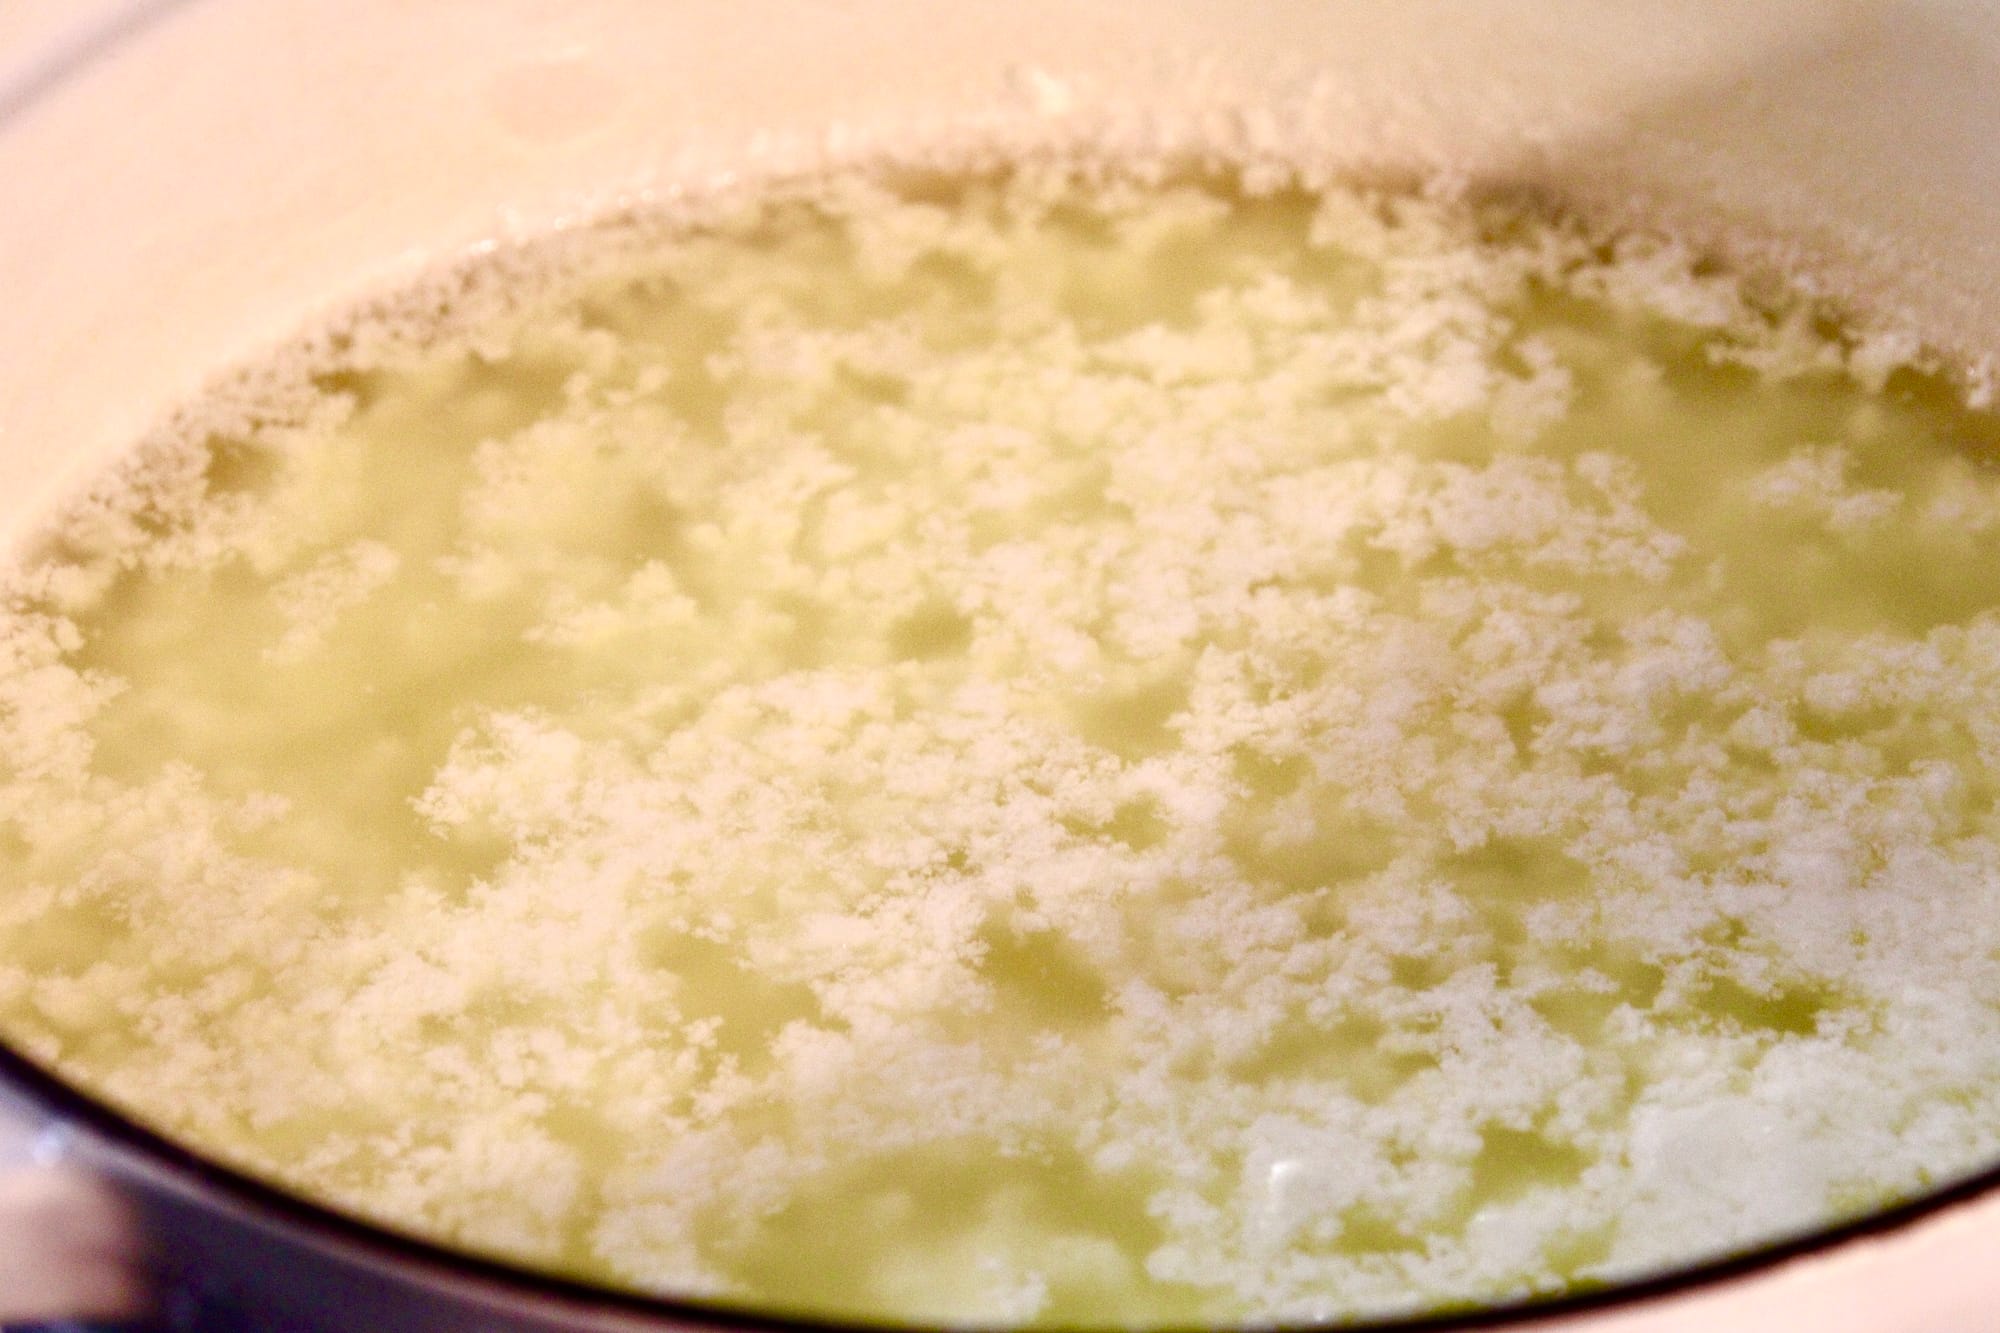 Curdled milk for queso fresco tostada topping.